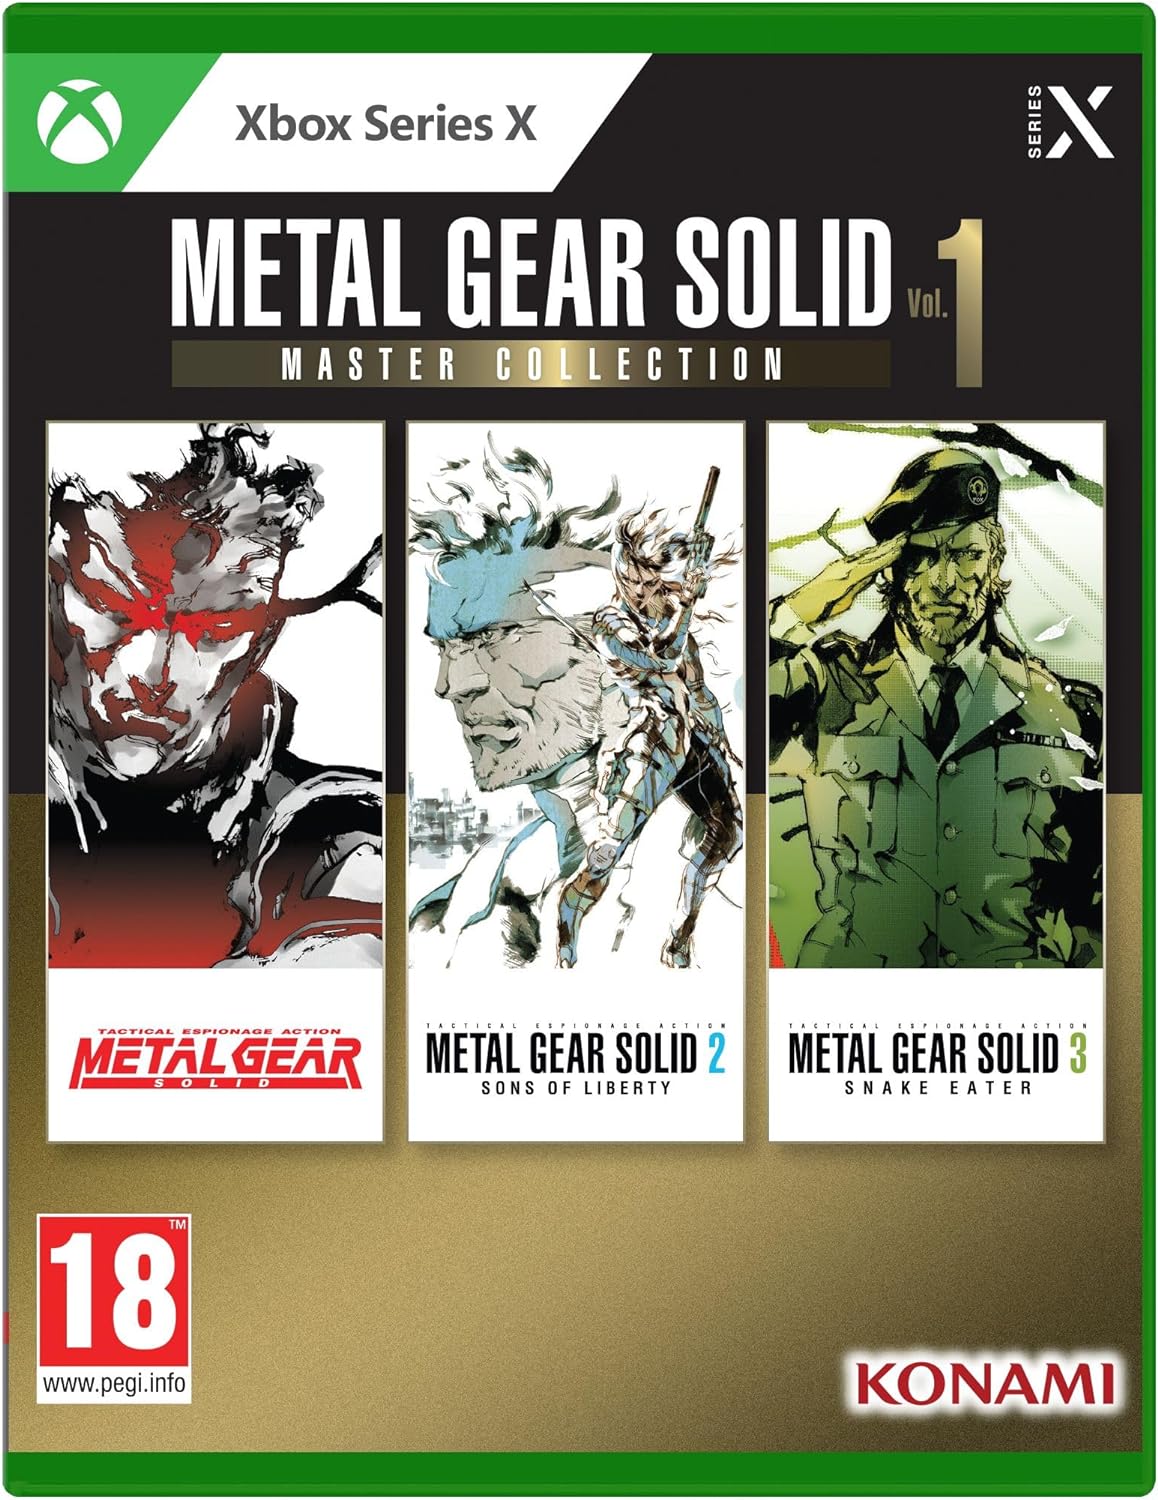 METAL GEAR SOLID MASTER COLLECTION VOL. 1